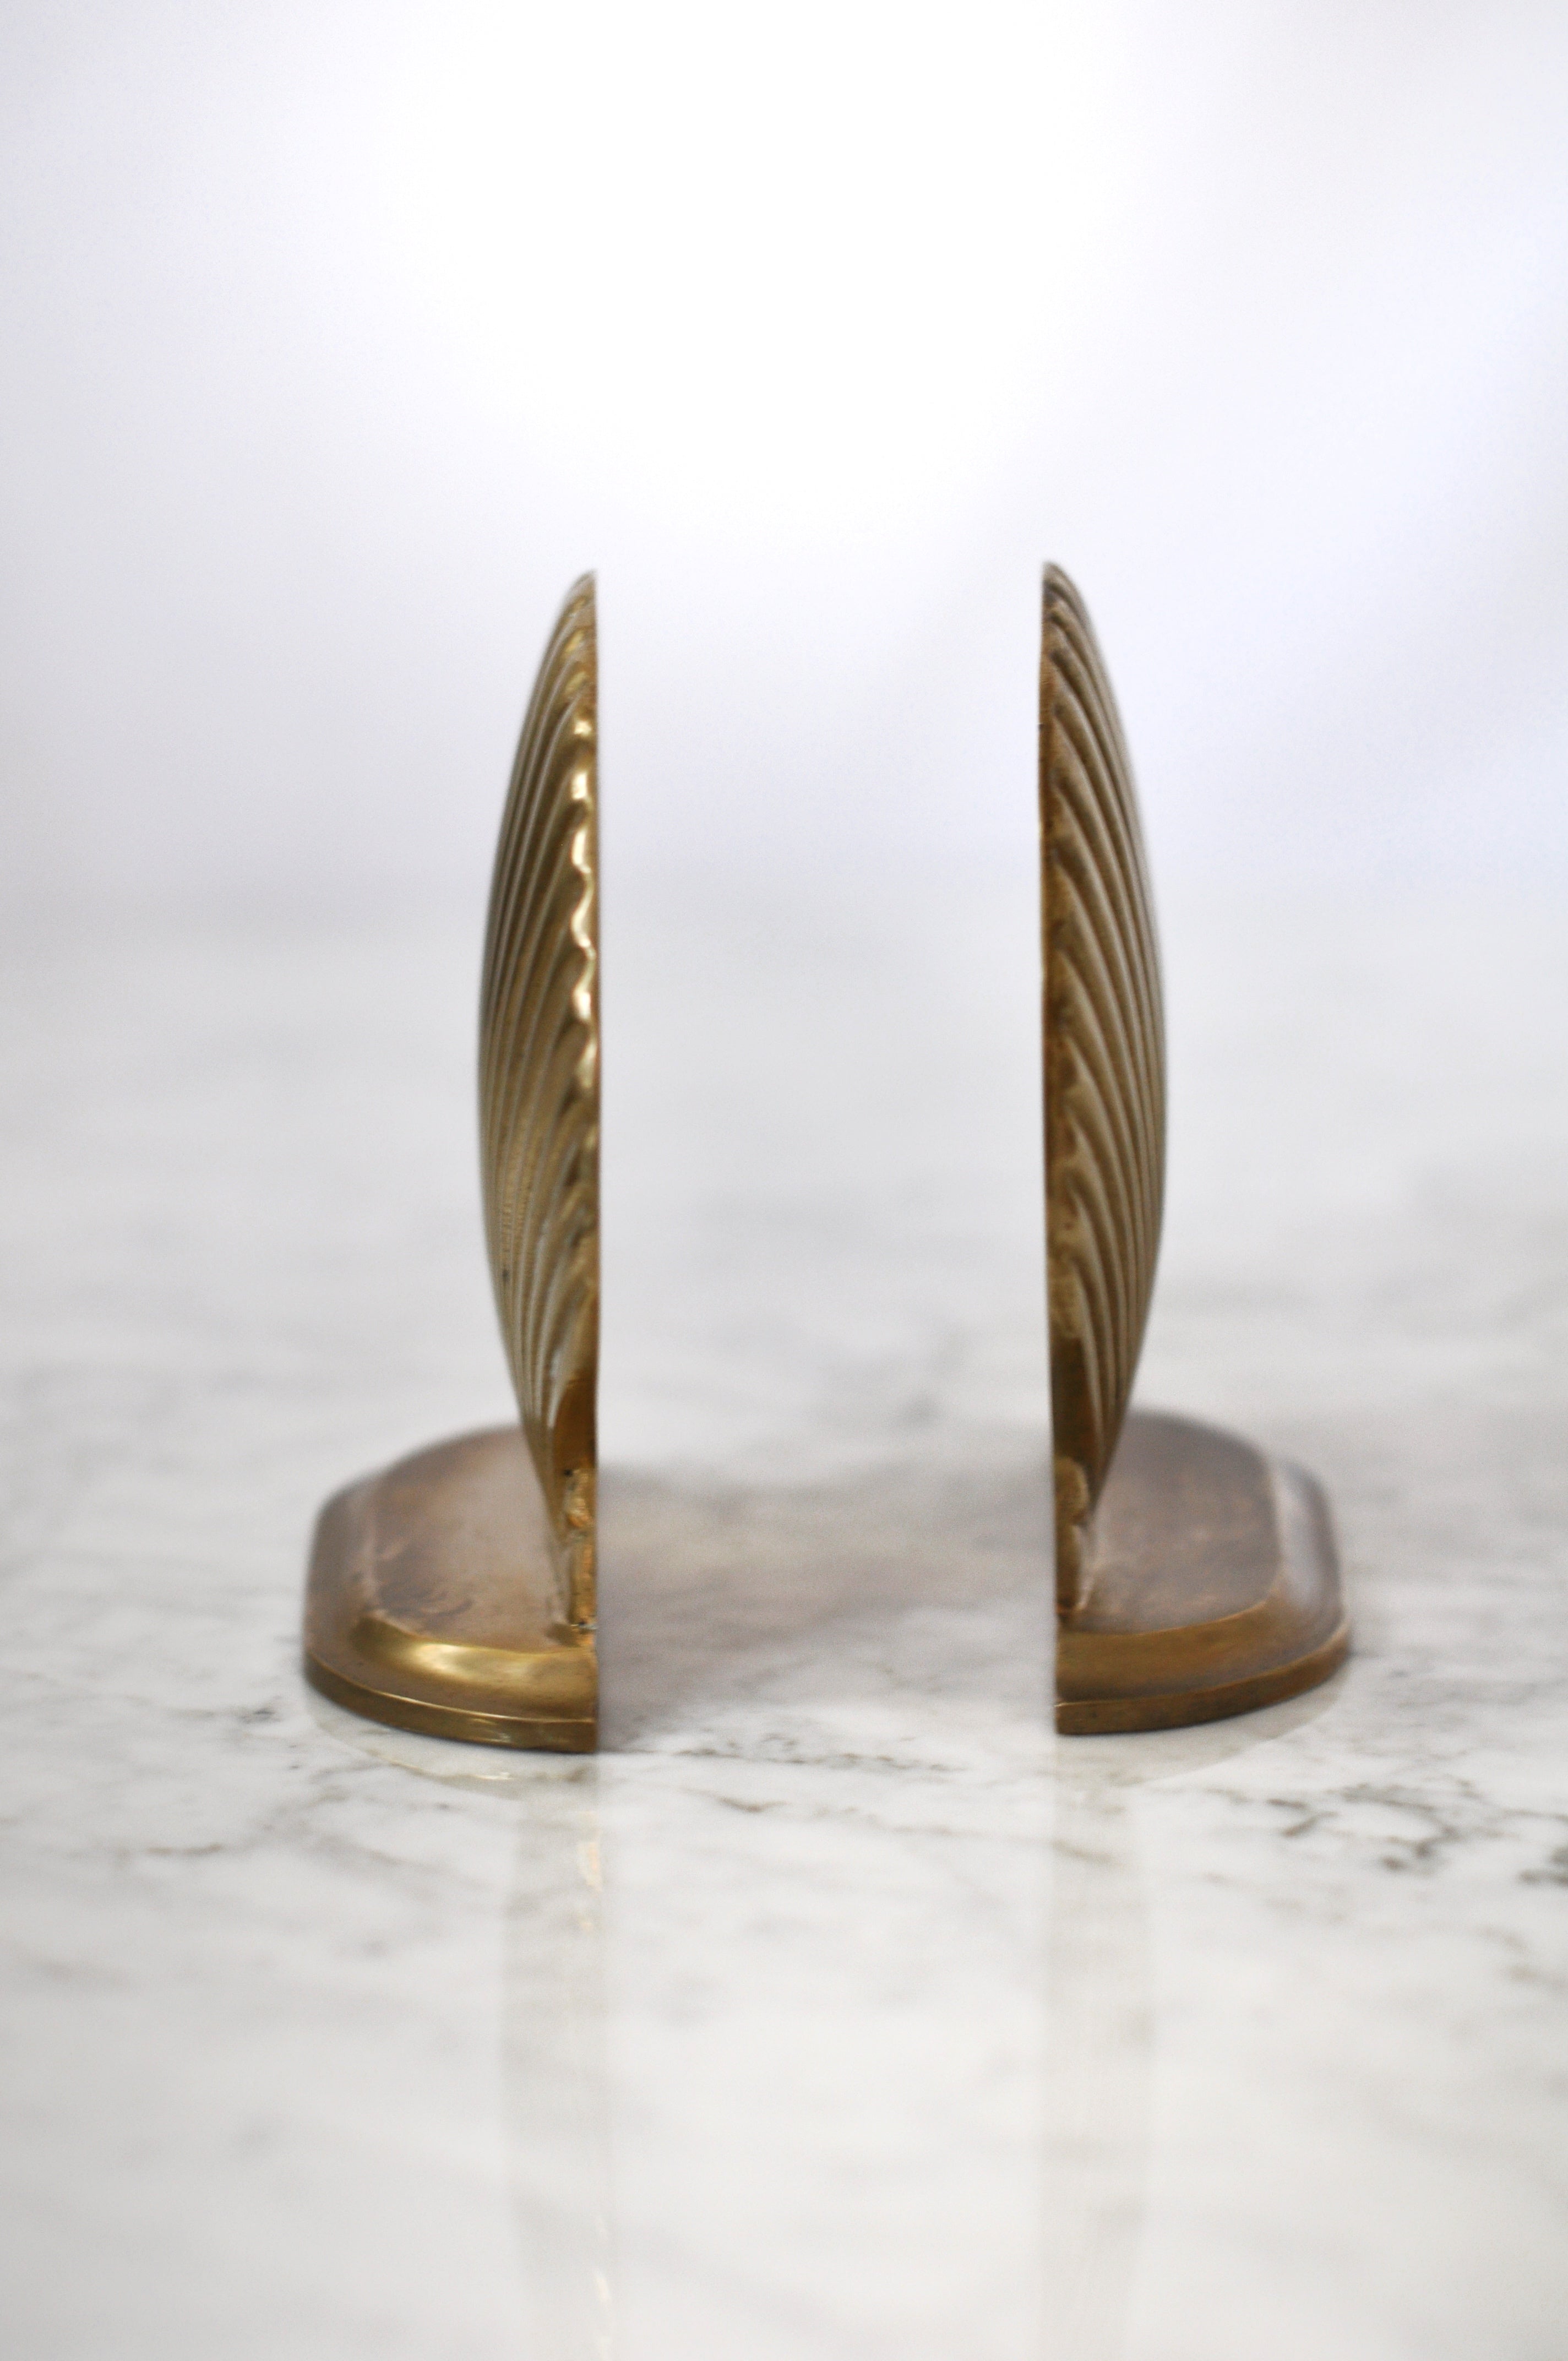 Silver Plate and Brass Seashell Bookends